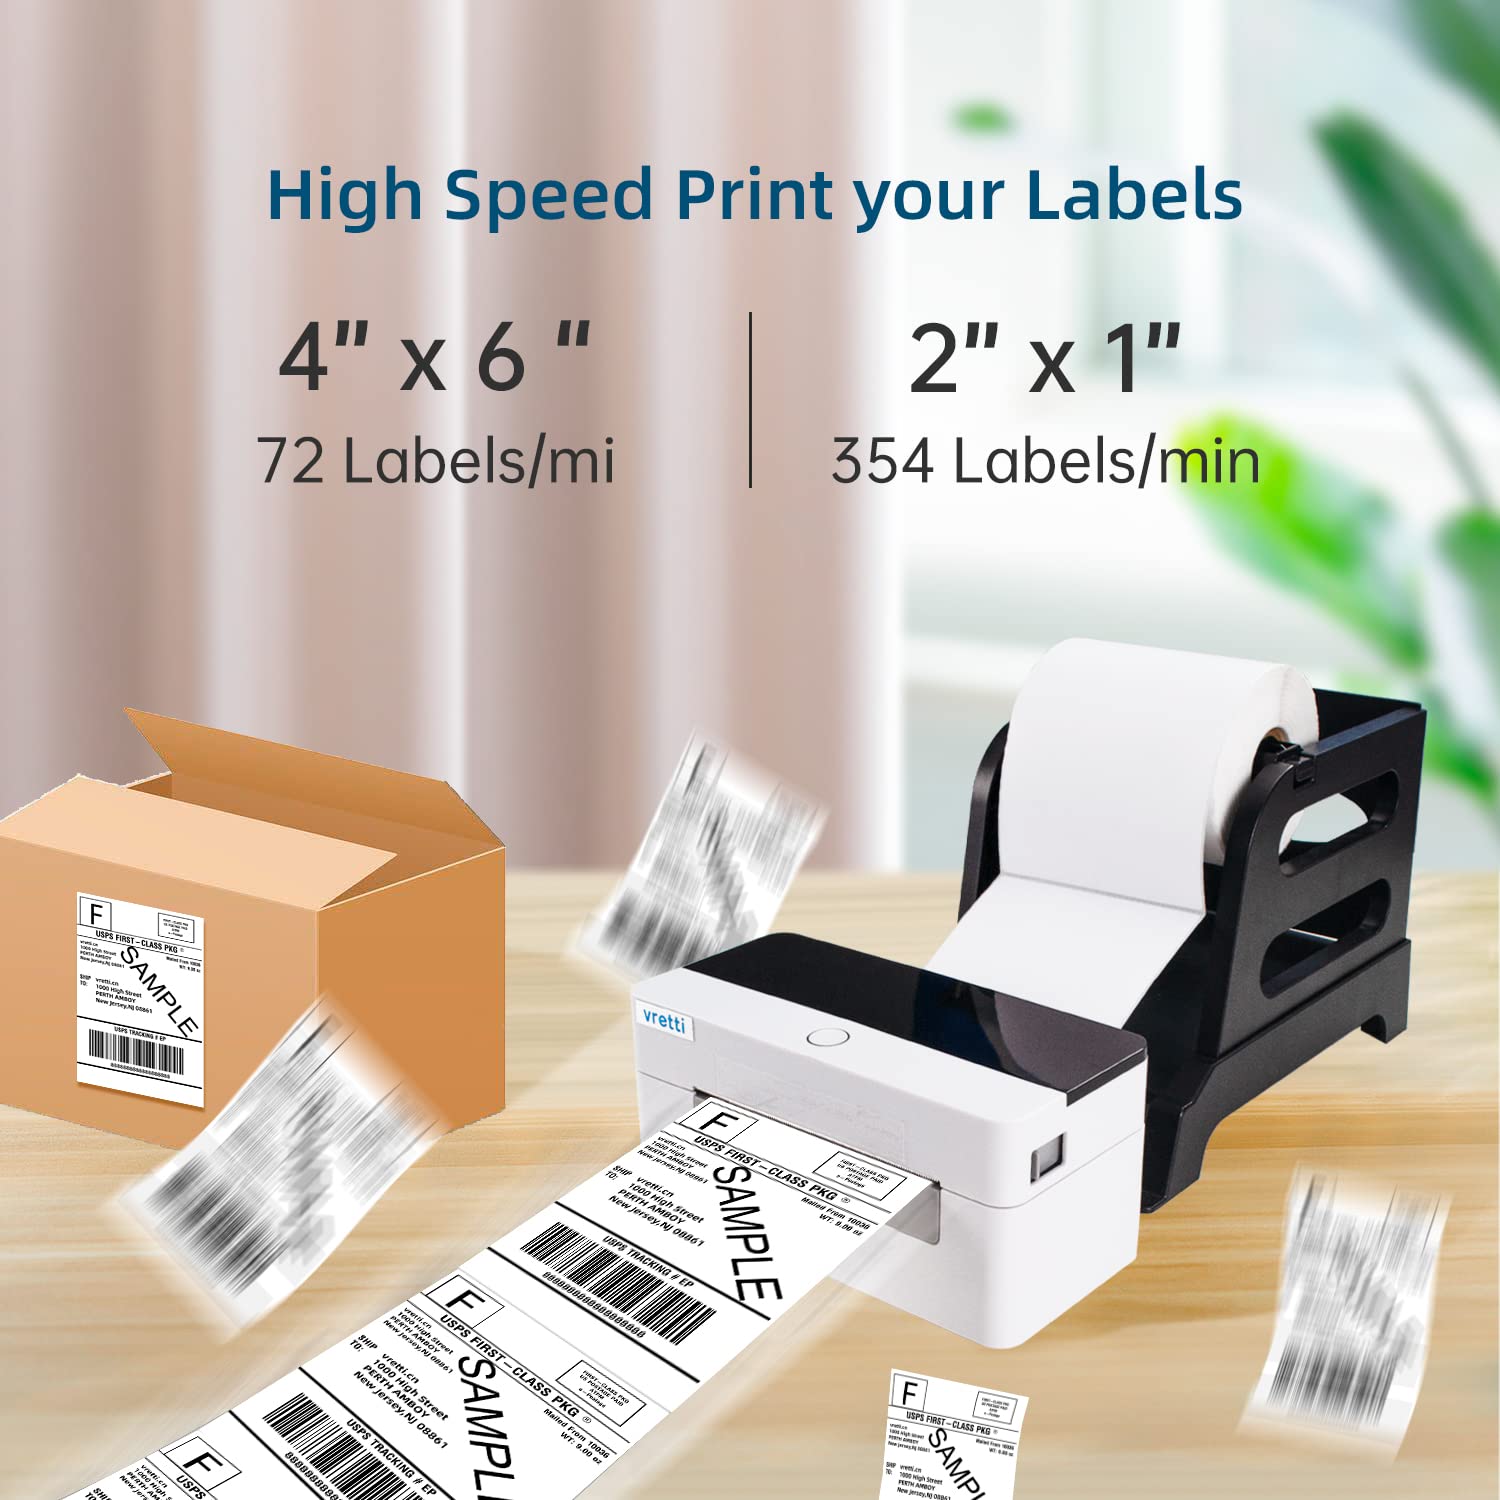 vretti Bluetooth Thermal Label Printer, 4x6 Shipping Label Printer for Shipping Packages & Small Business, Wireless Label Printer Compatible with iPhone Android Window Mac USPS UPS Amazon